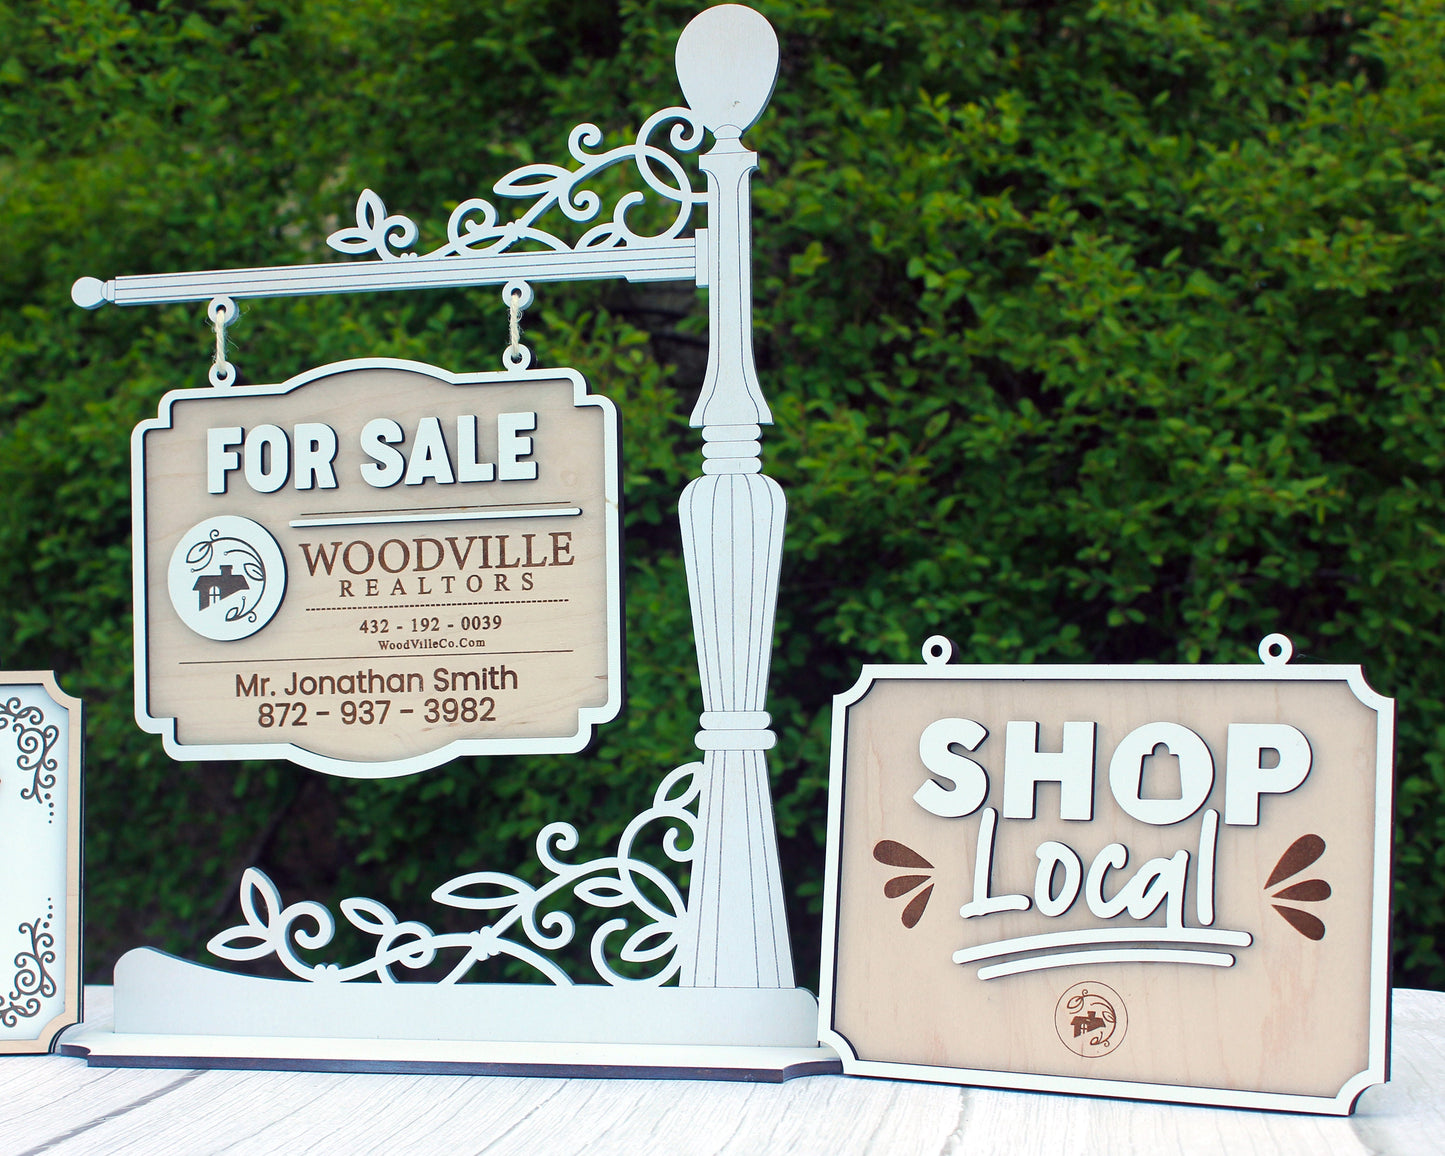 The Hanging Sign - SVG File Download - Sized for Glowforge - Customizable advertisement & branding Sign